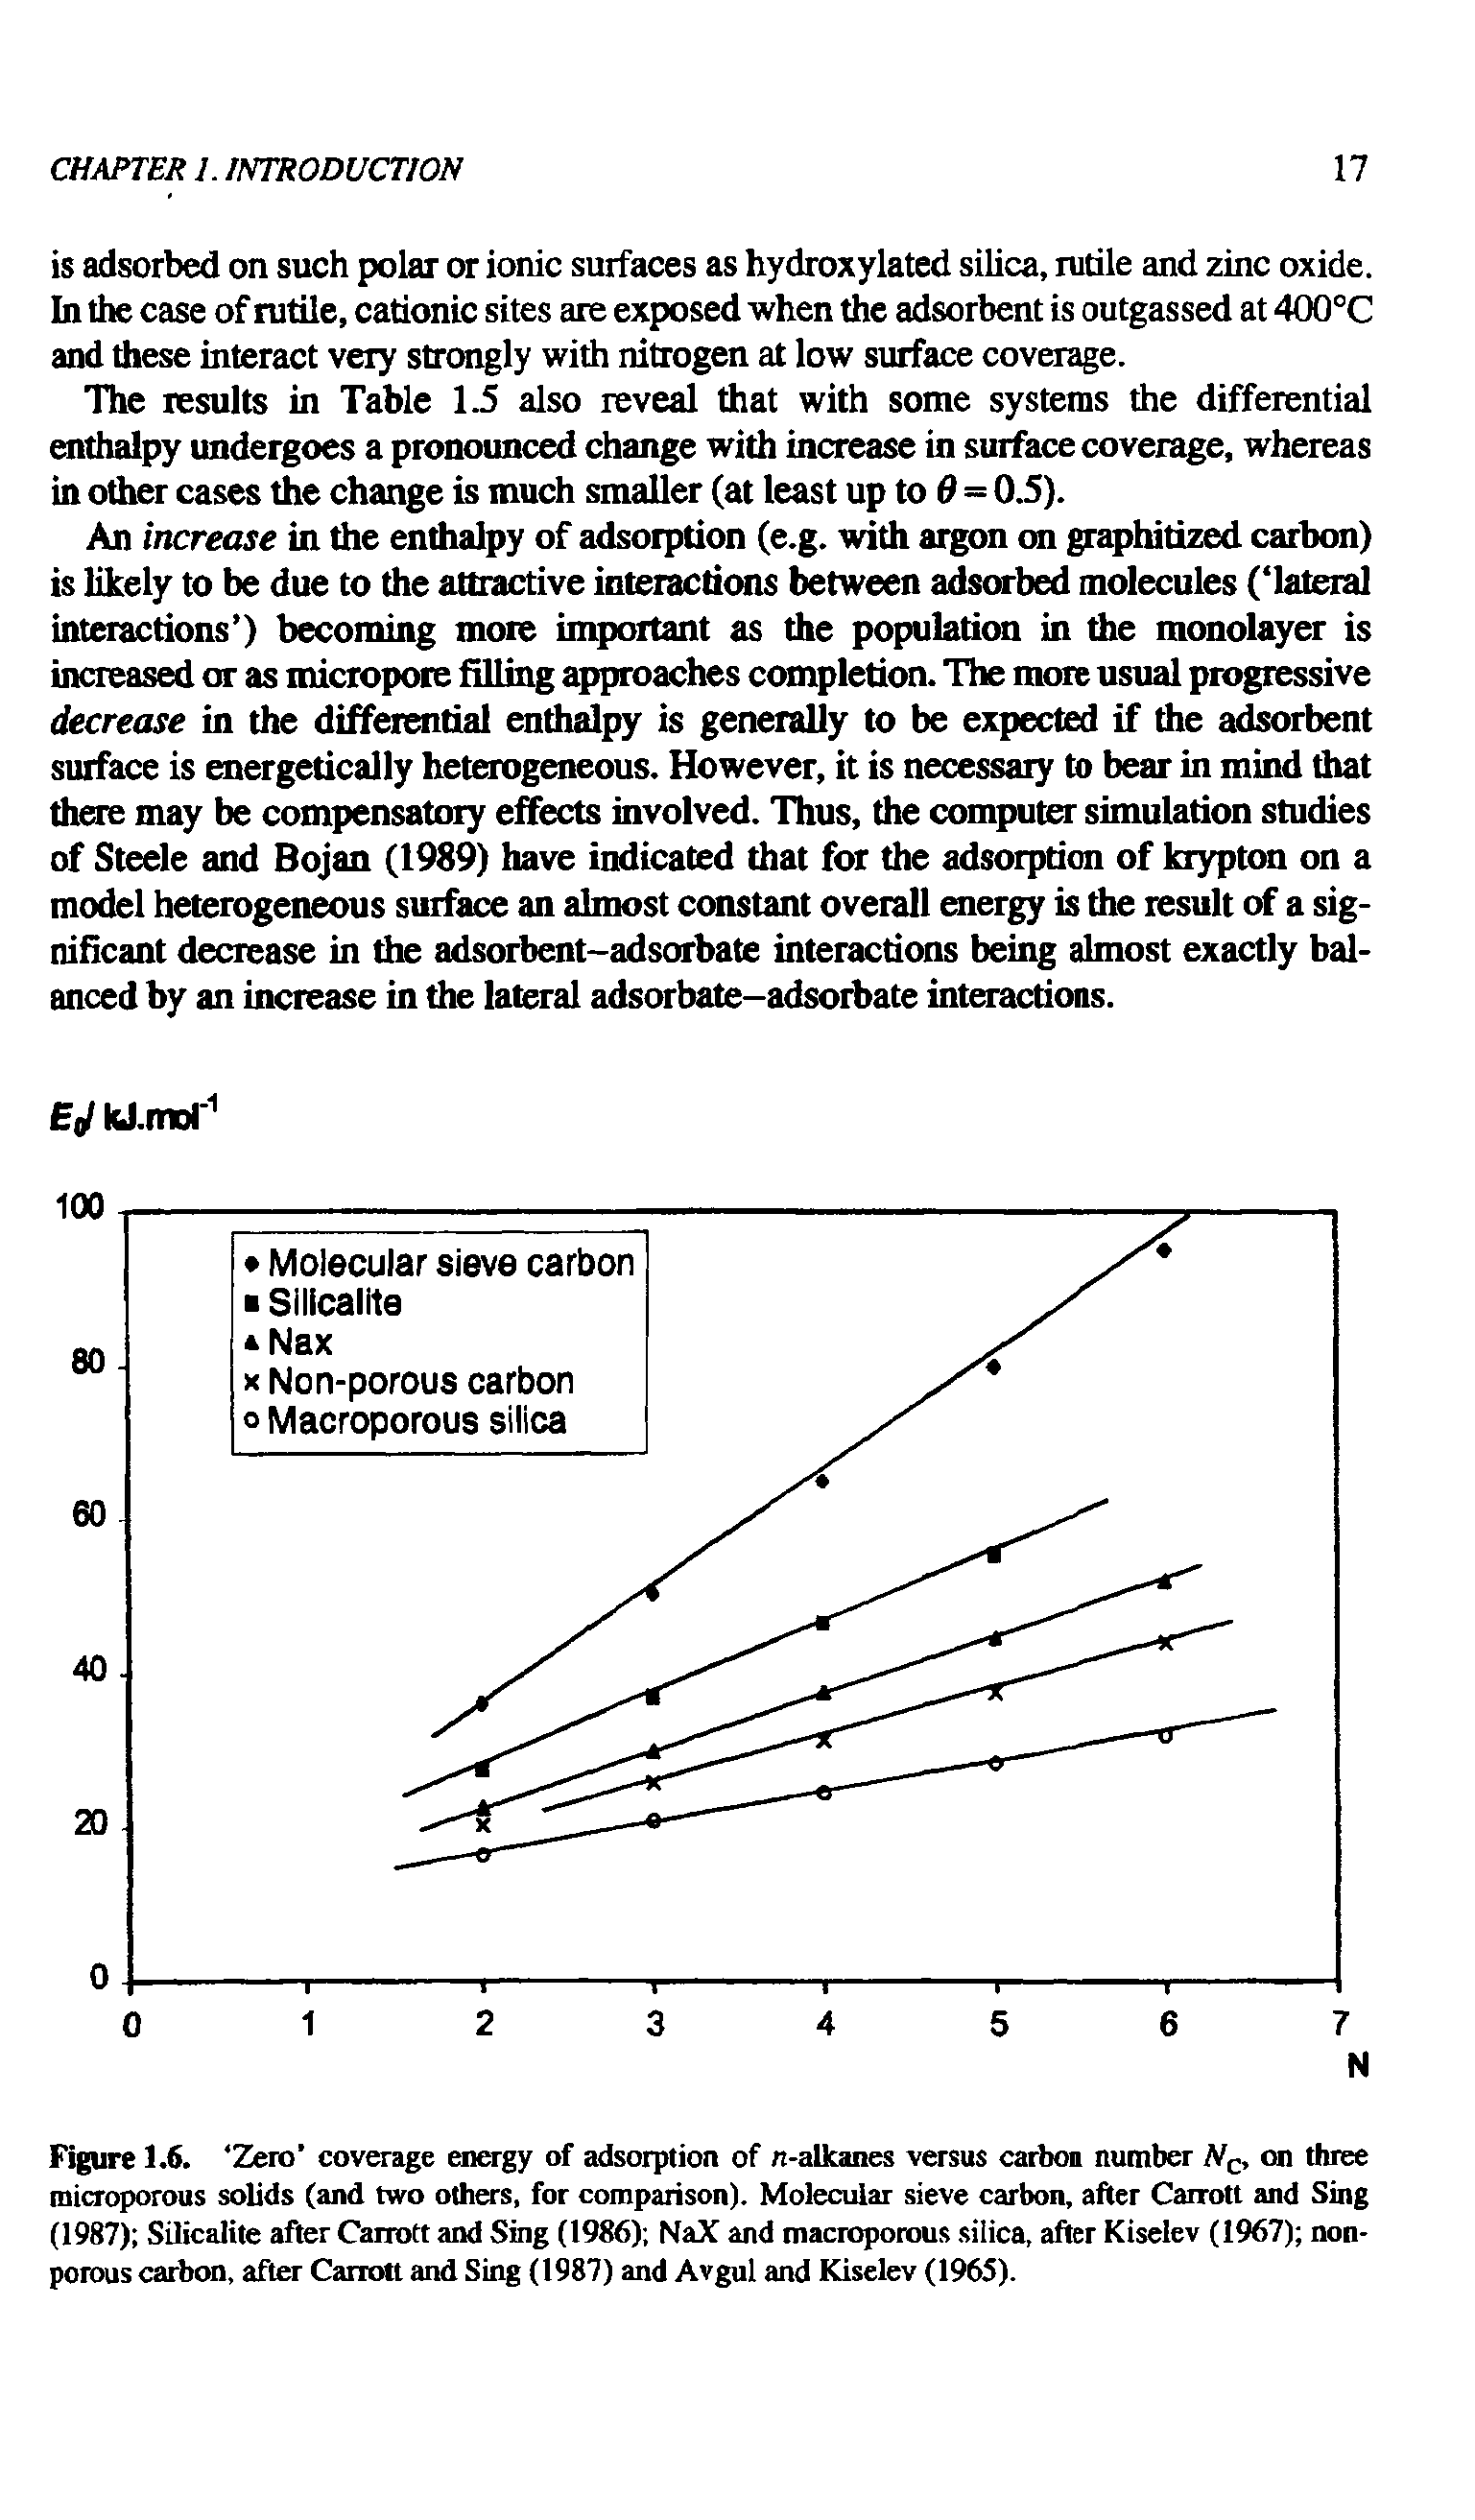 Figure 1.6. Zero coverage energy of adsorption of n-alkanes versus carbon number Nc, on three microporous solids (and two others, for comparison). Molecular sieve carbon, after Carrott and Sing (1987) Silicalite after Canott and Sing (1986) NaX and macroporous silica, after Kiselev (1967) non-porous carbon, after Carrott and Sing (1987) and Avgul and Kiselev (1965).